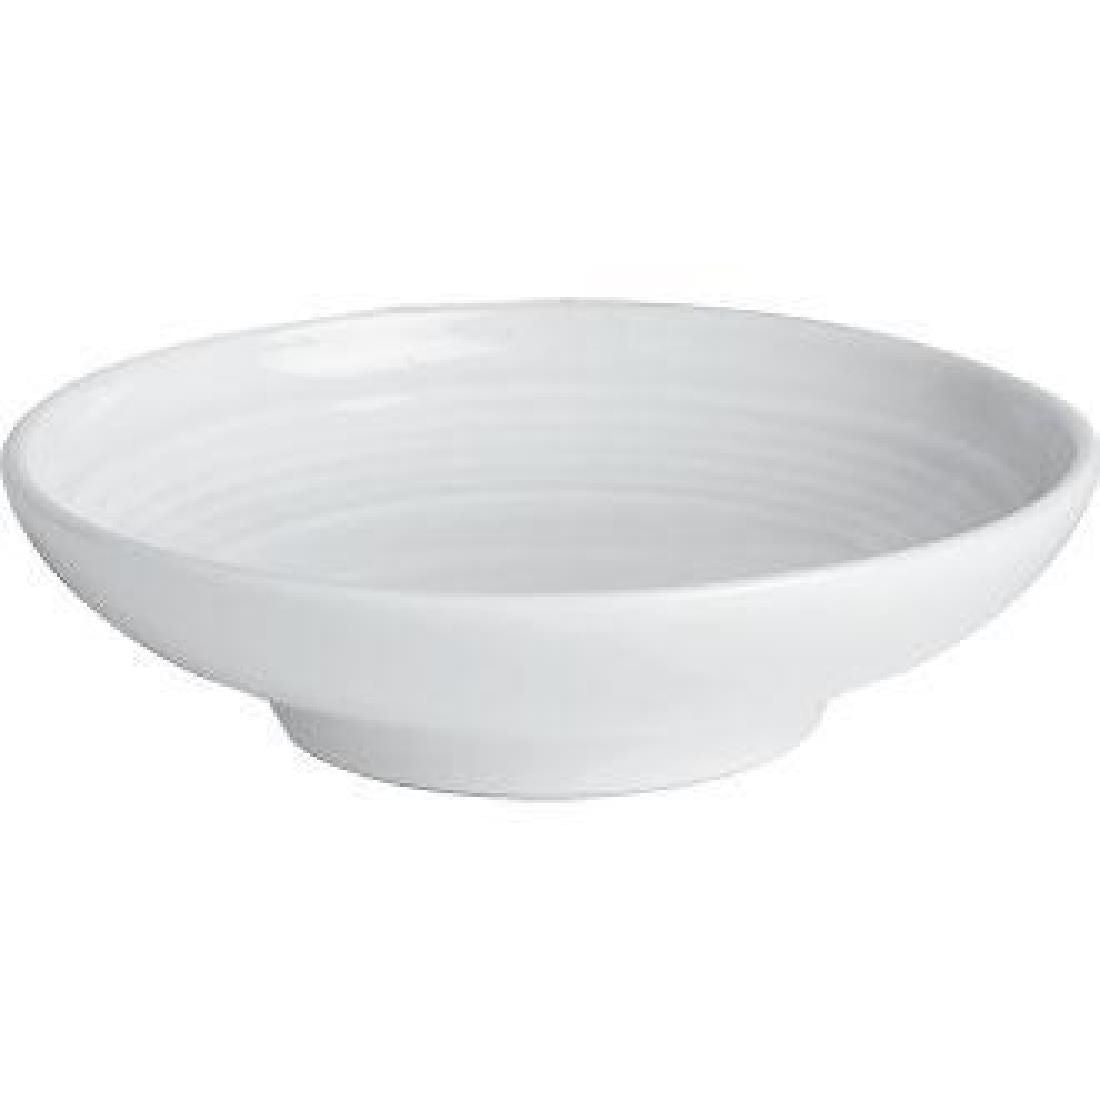 Steelite Ozorio Aura Small Coupe Sauce Dishes 88mm (Pack of 36)